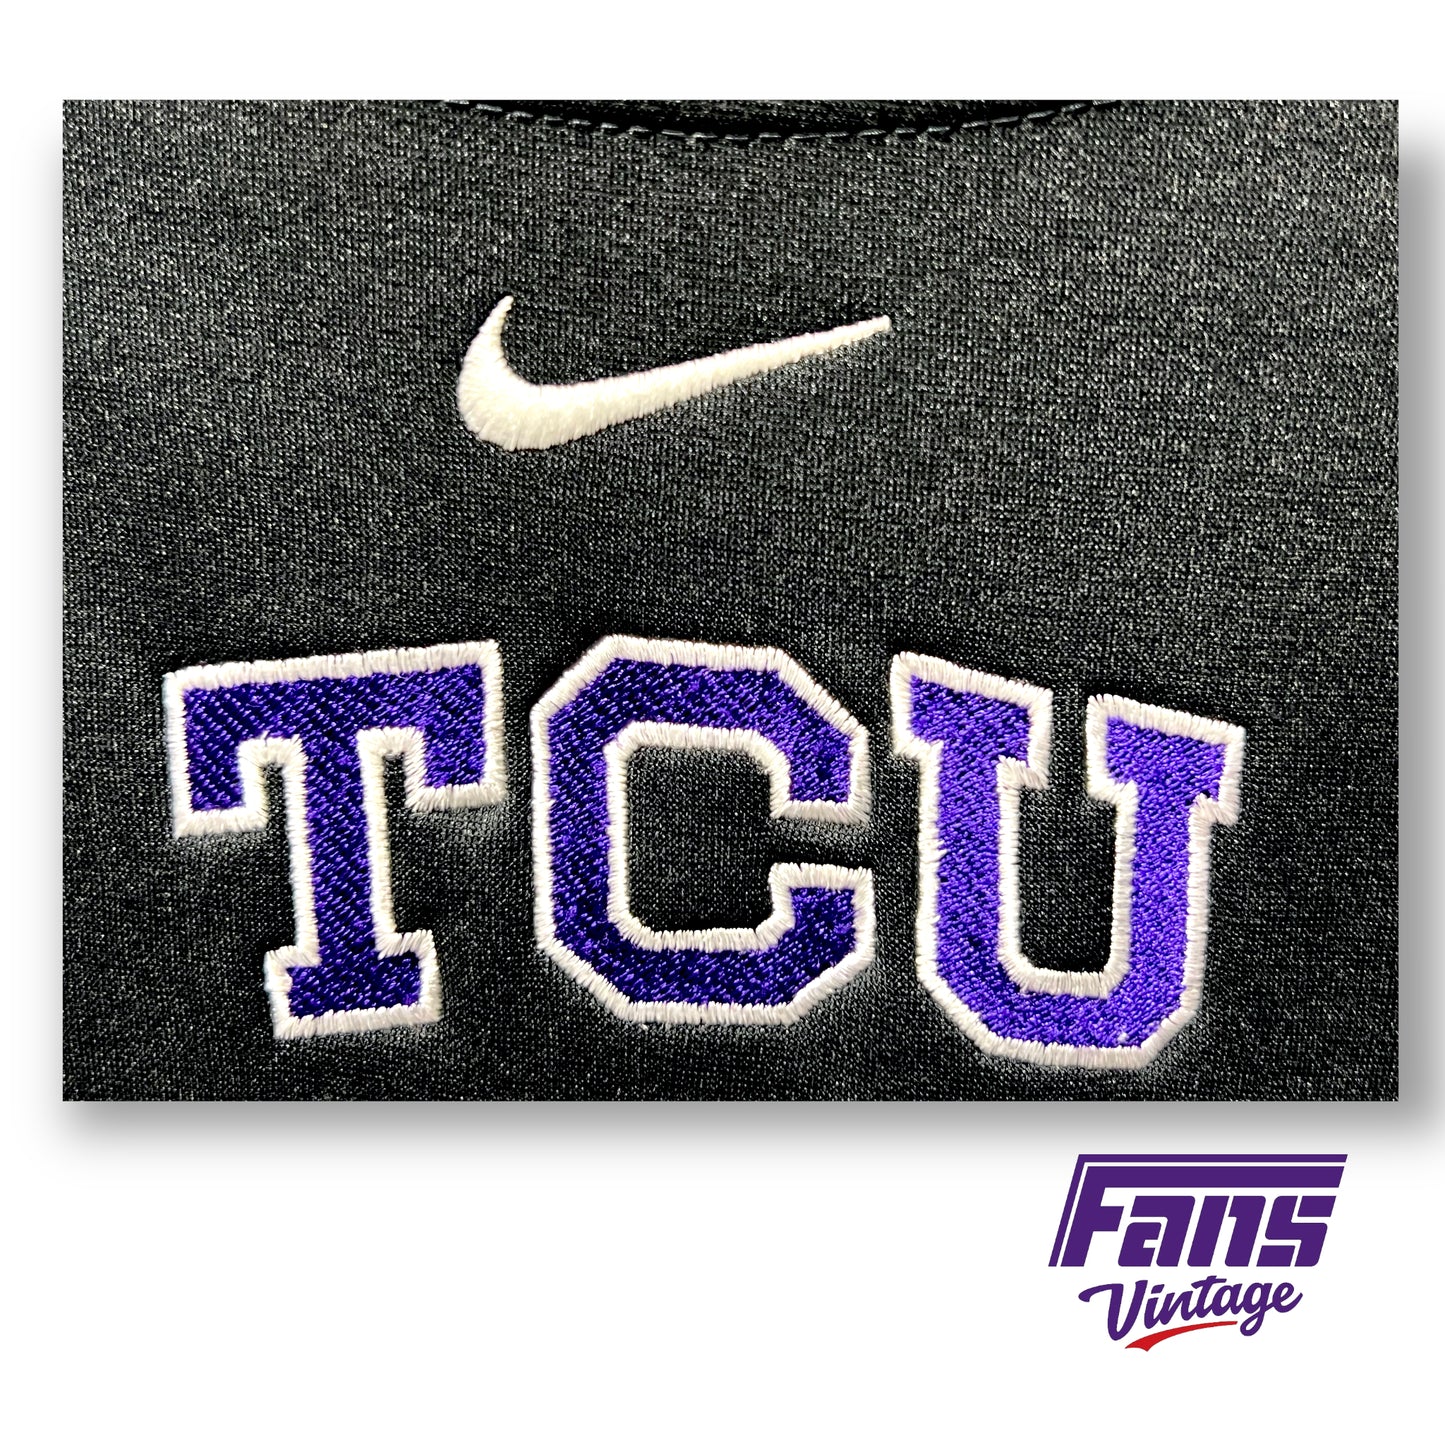 Awesome Y2K Vintage TCU Soccer Team Issued Nike Thermafit Sweater